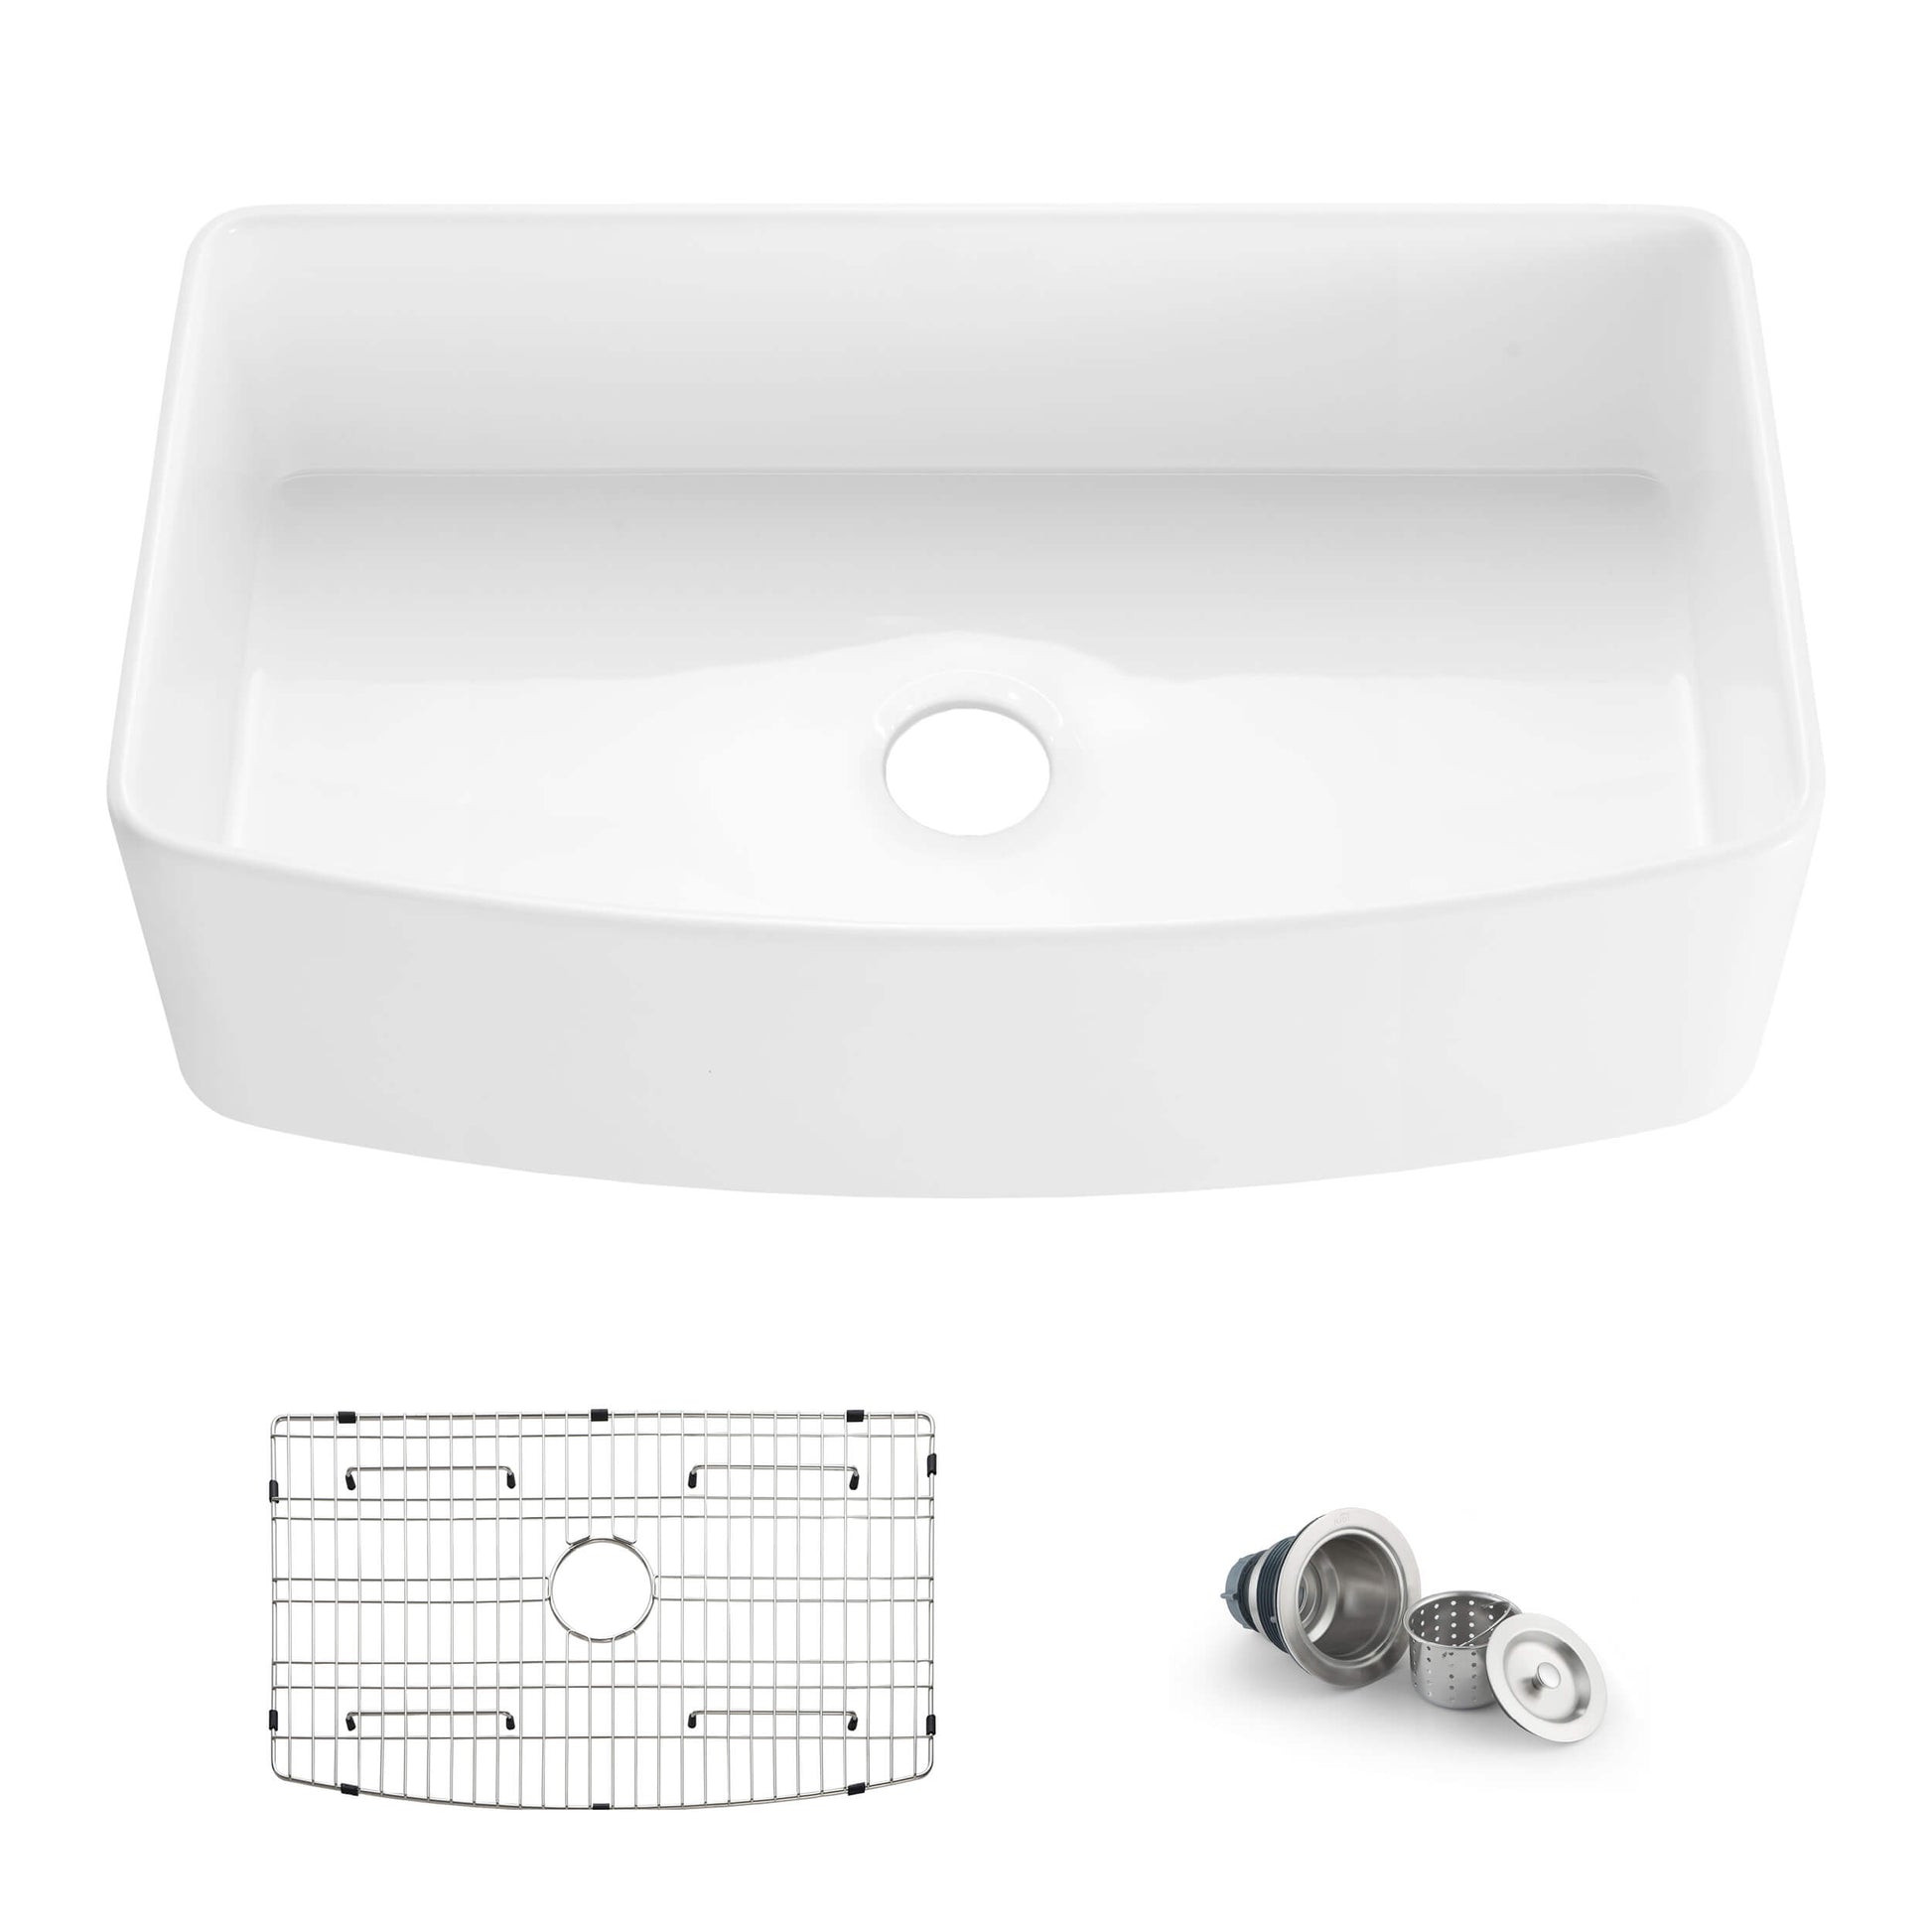 Kibi 36" x 20" x 10" Pure Series Glossy White Single Bowl Fireclay Farmhouse Sink With Curved Apron Front